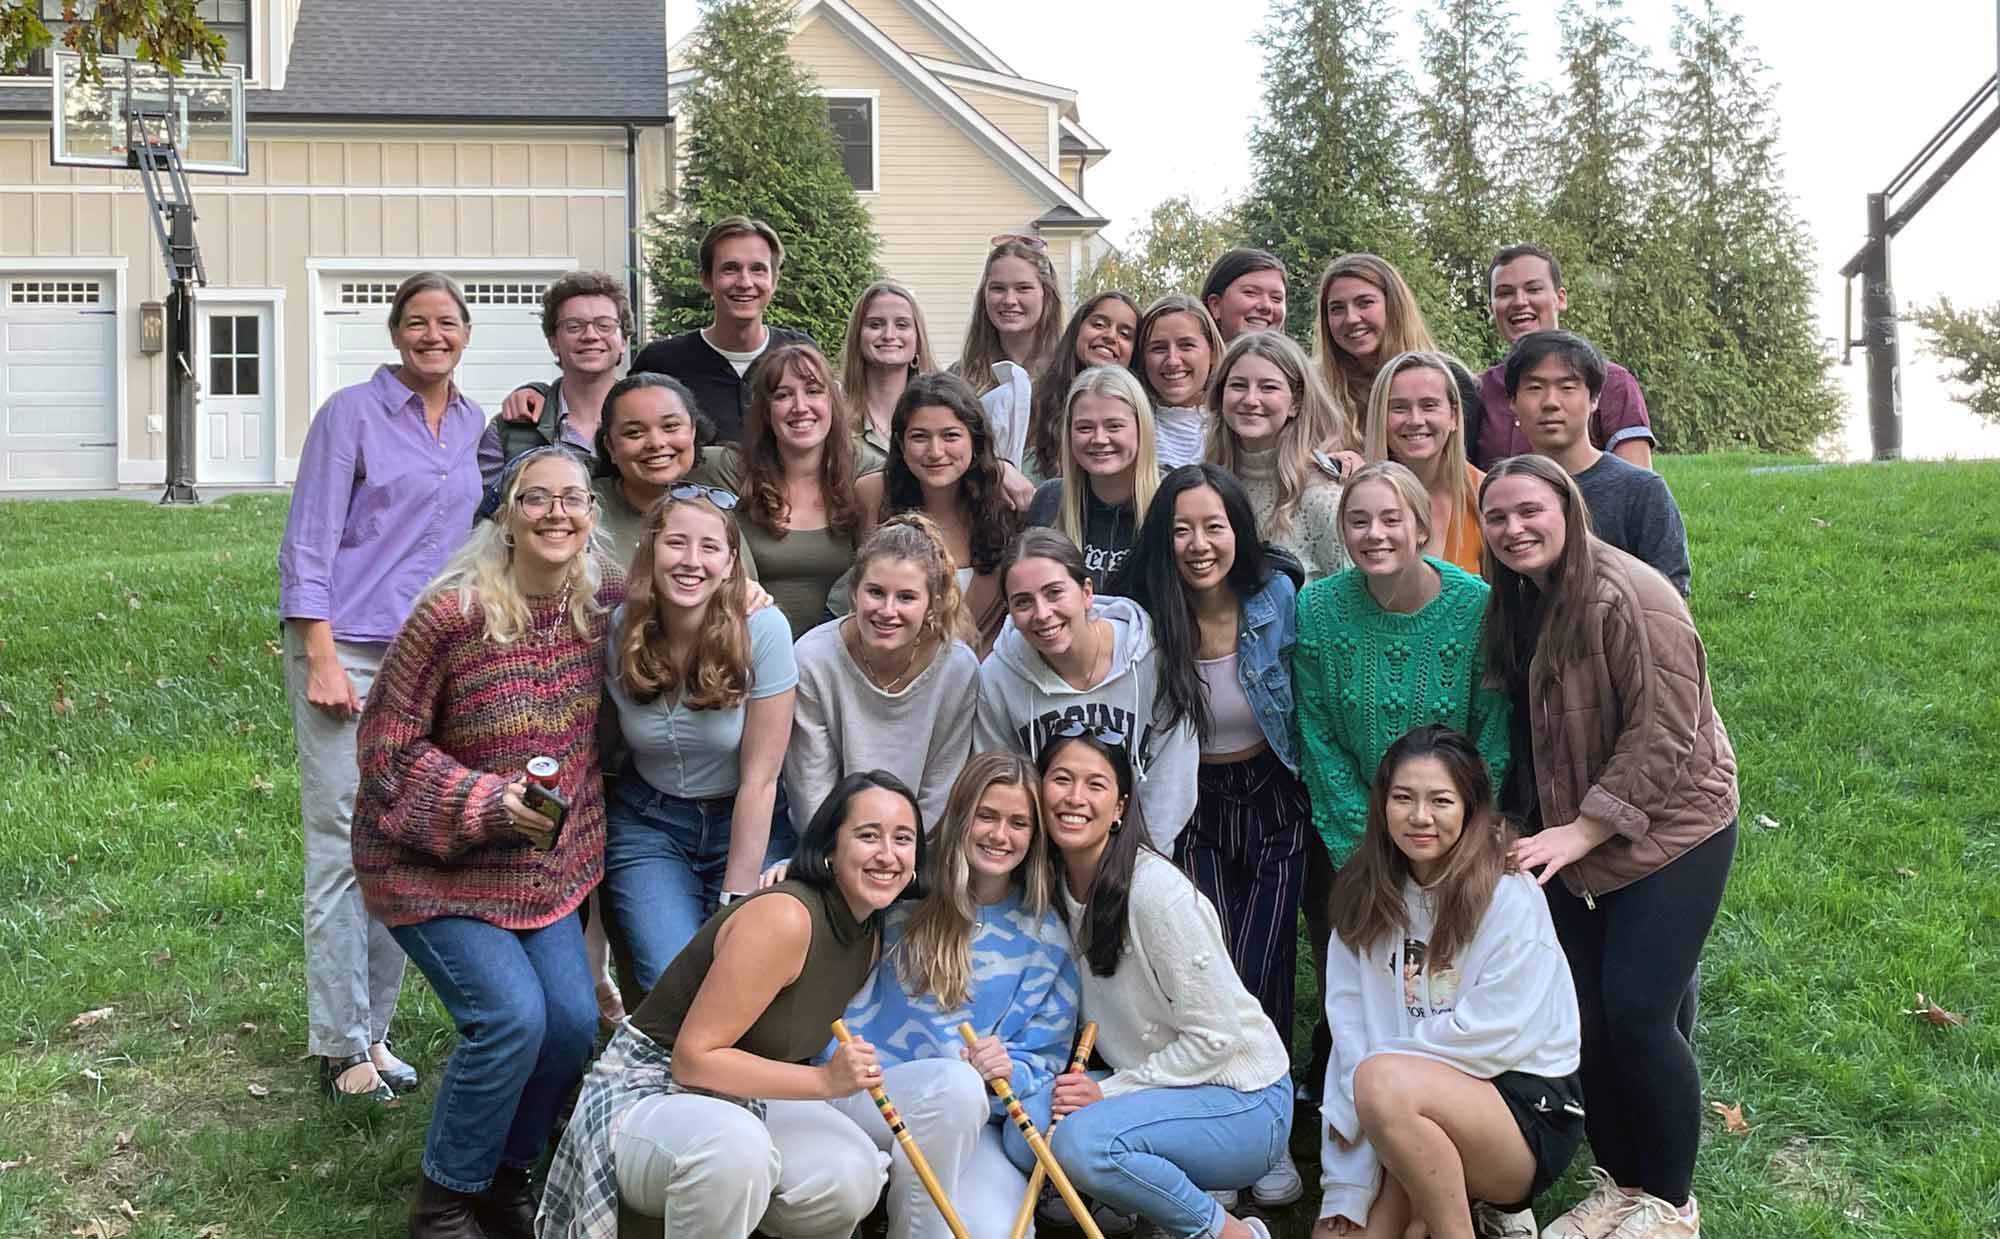 Group portrait of Carrie Heilman gathered with many of her students